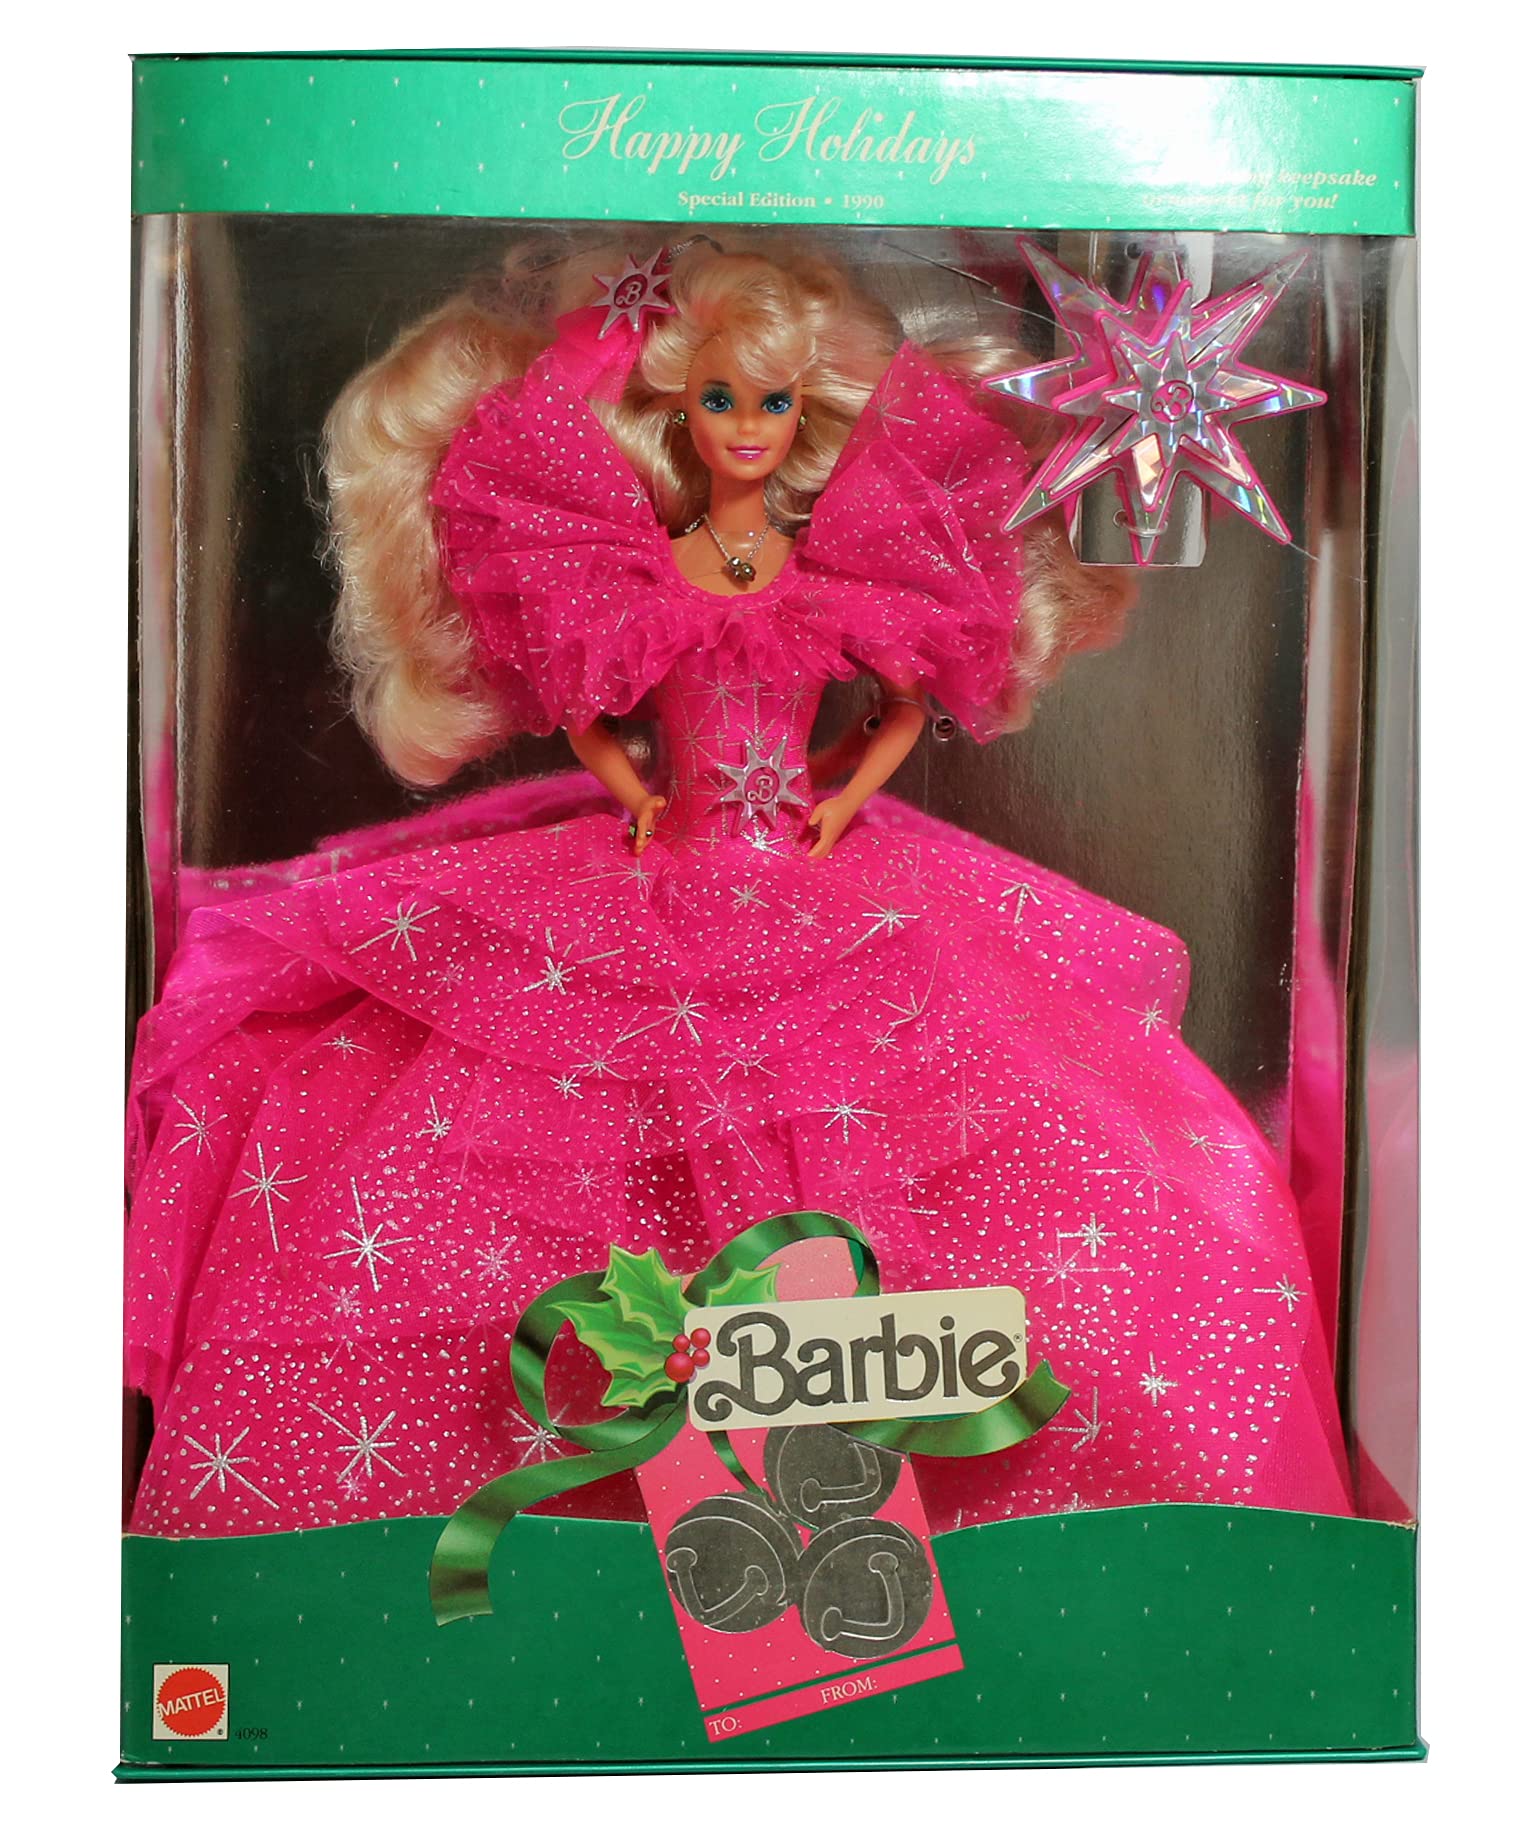 1990s Barbies: Collectible Dolls from the Decade